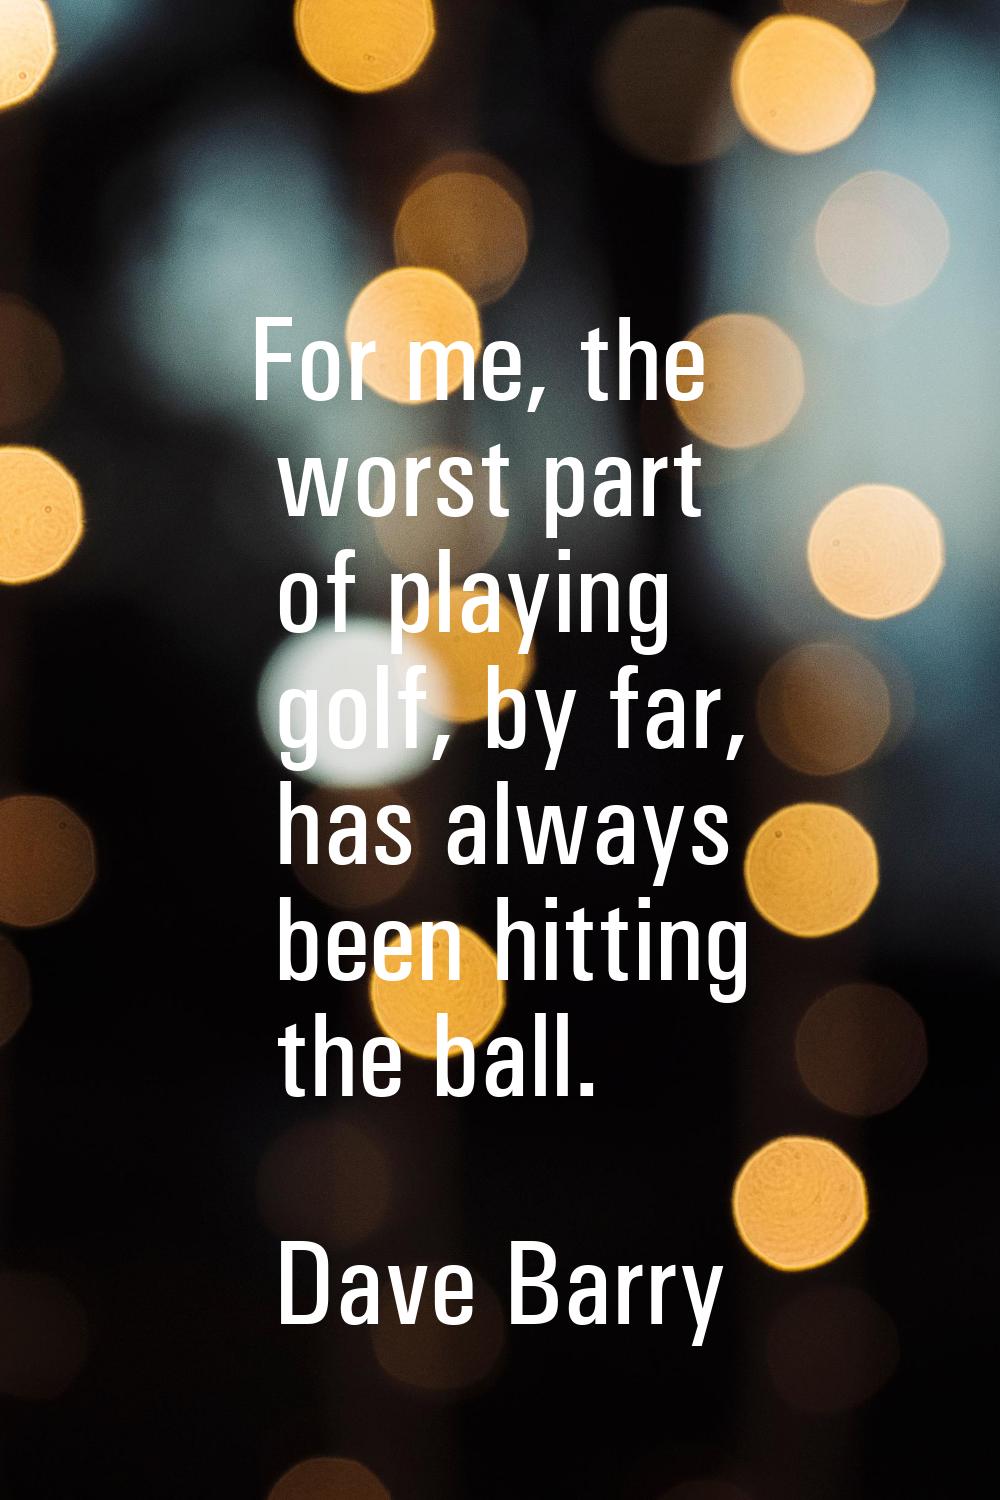 For me, the worst part of playing golf, by far, has always been hitting the ball.